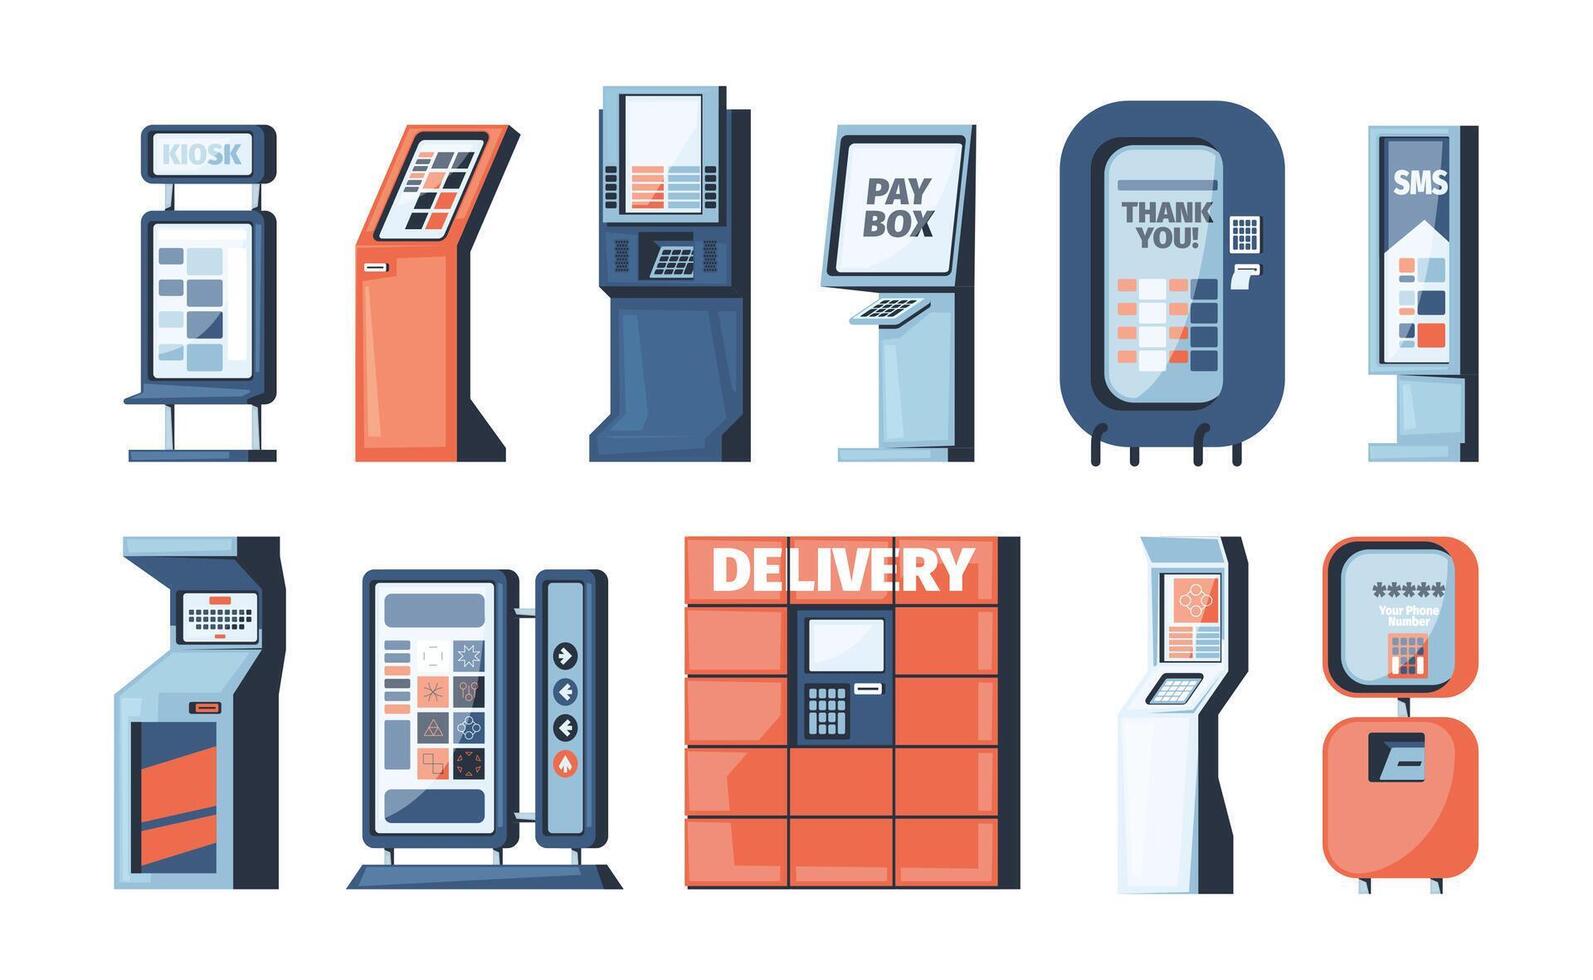 Ticket kiosk. Credit payment machine, atm stand, vending snack kiosk, money terminal and commercial machine freestanding design. Vector cartoon set